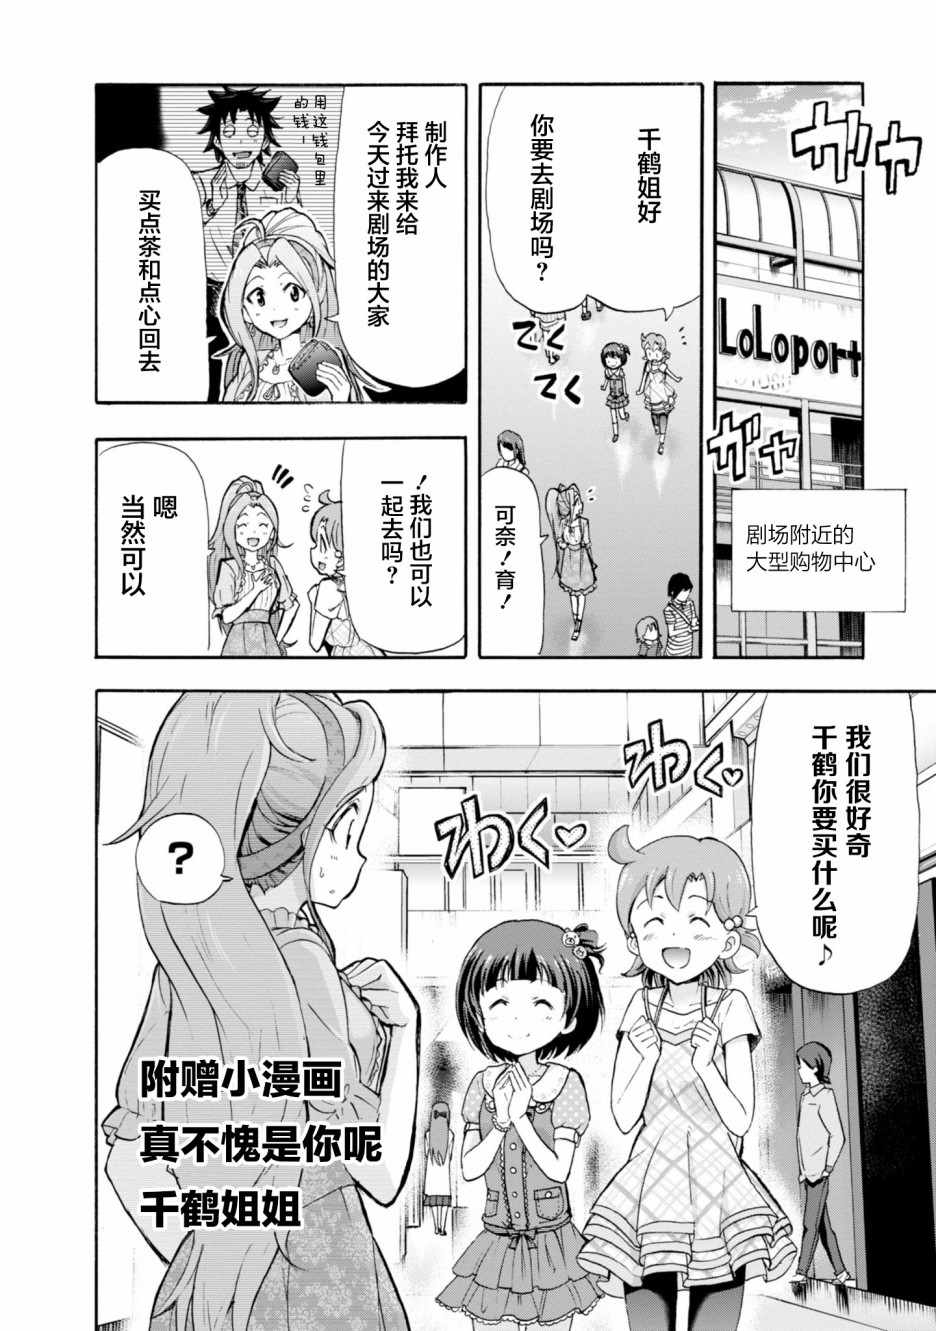 《THE IDOLM@STER MILLION LIVE! Blooming Clover》漫画 Blooming Clover 01卷附赠